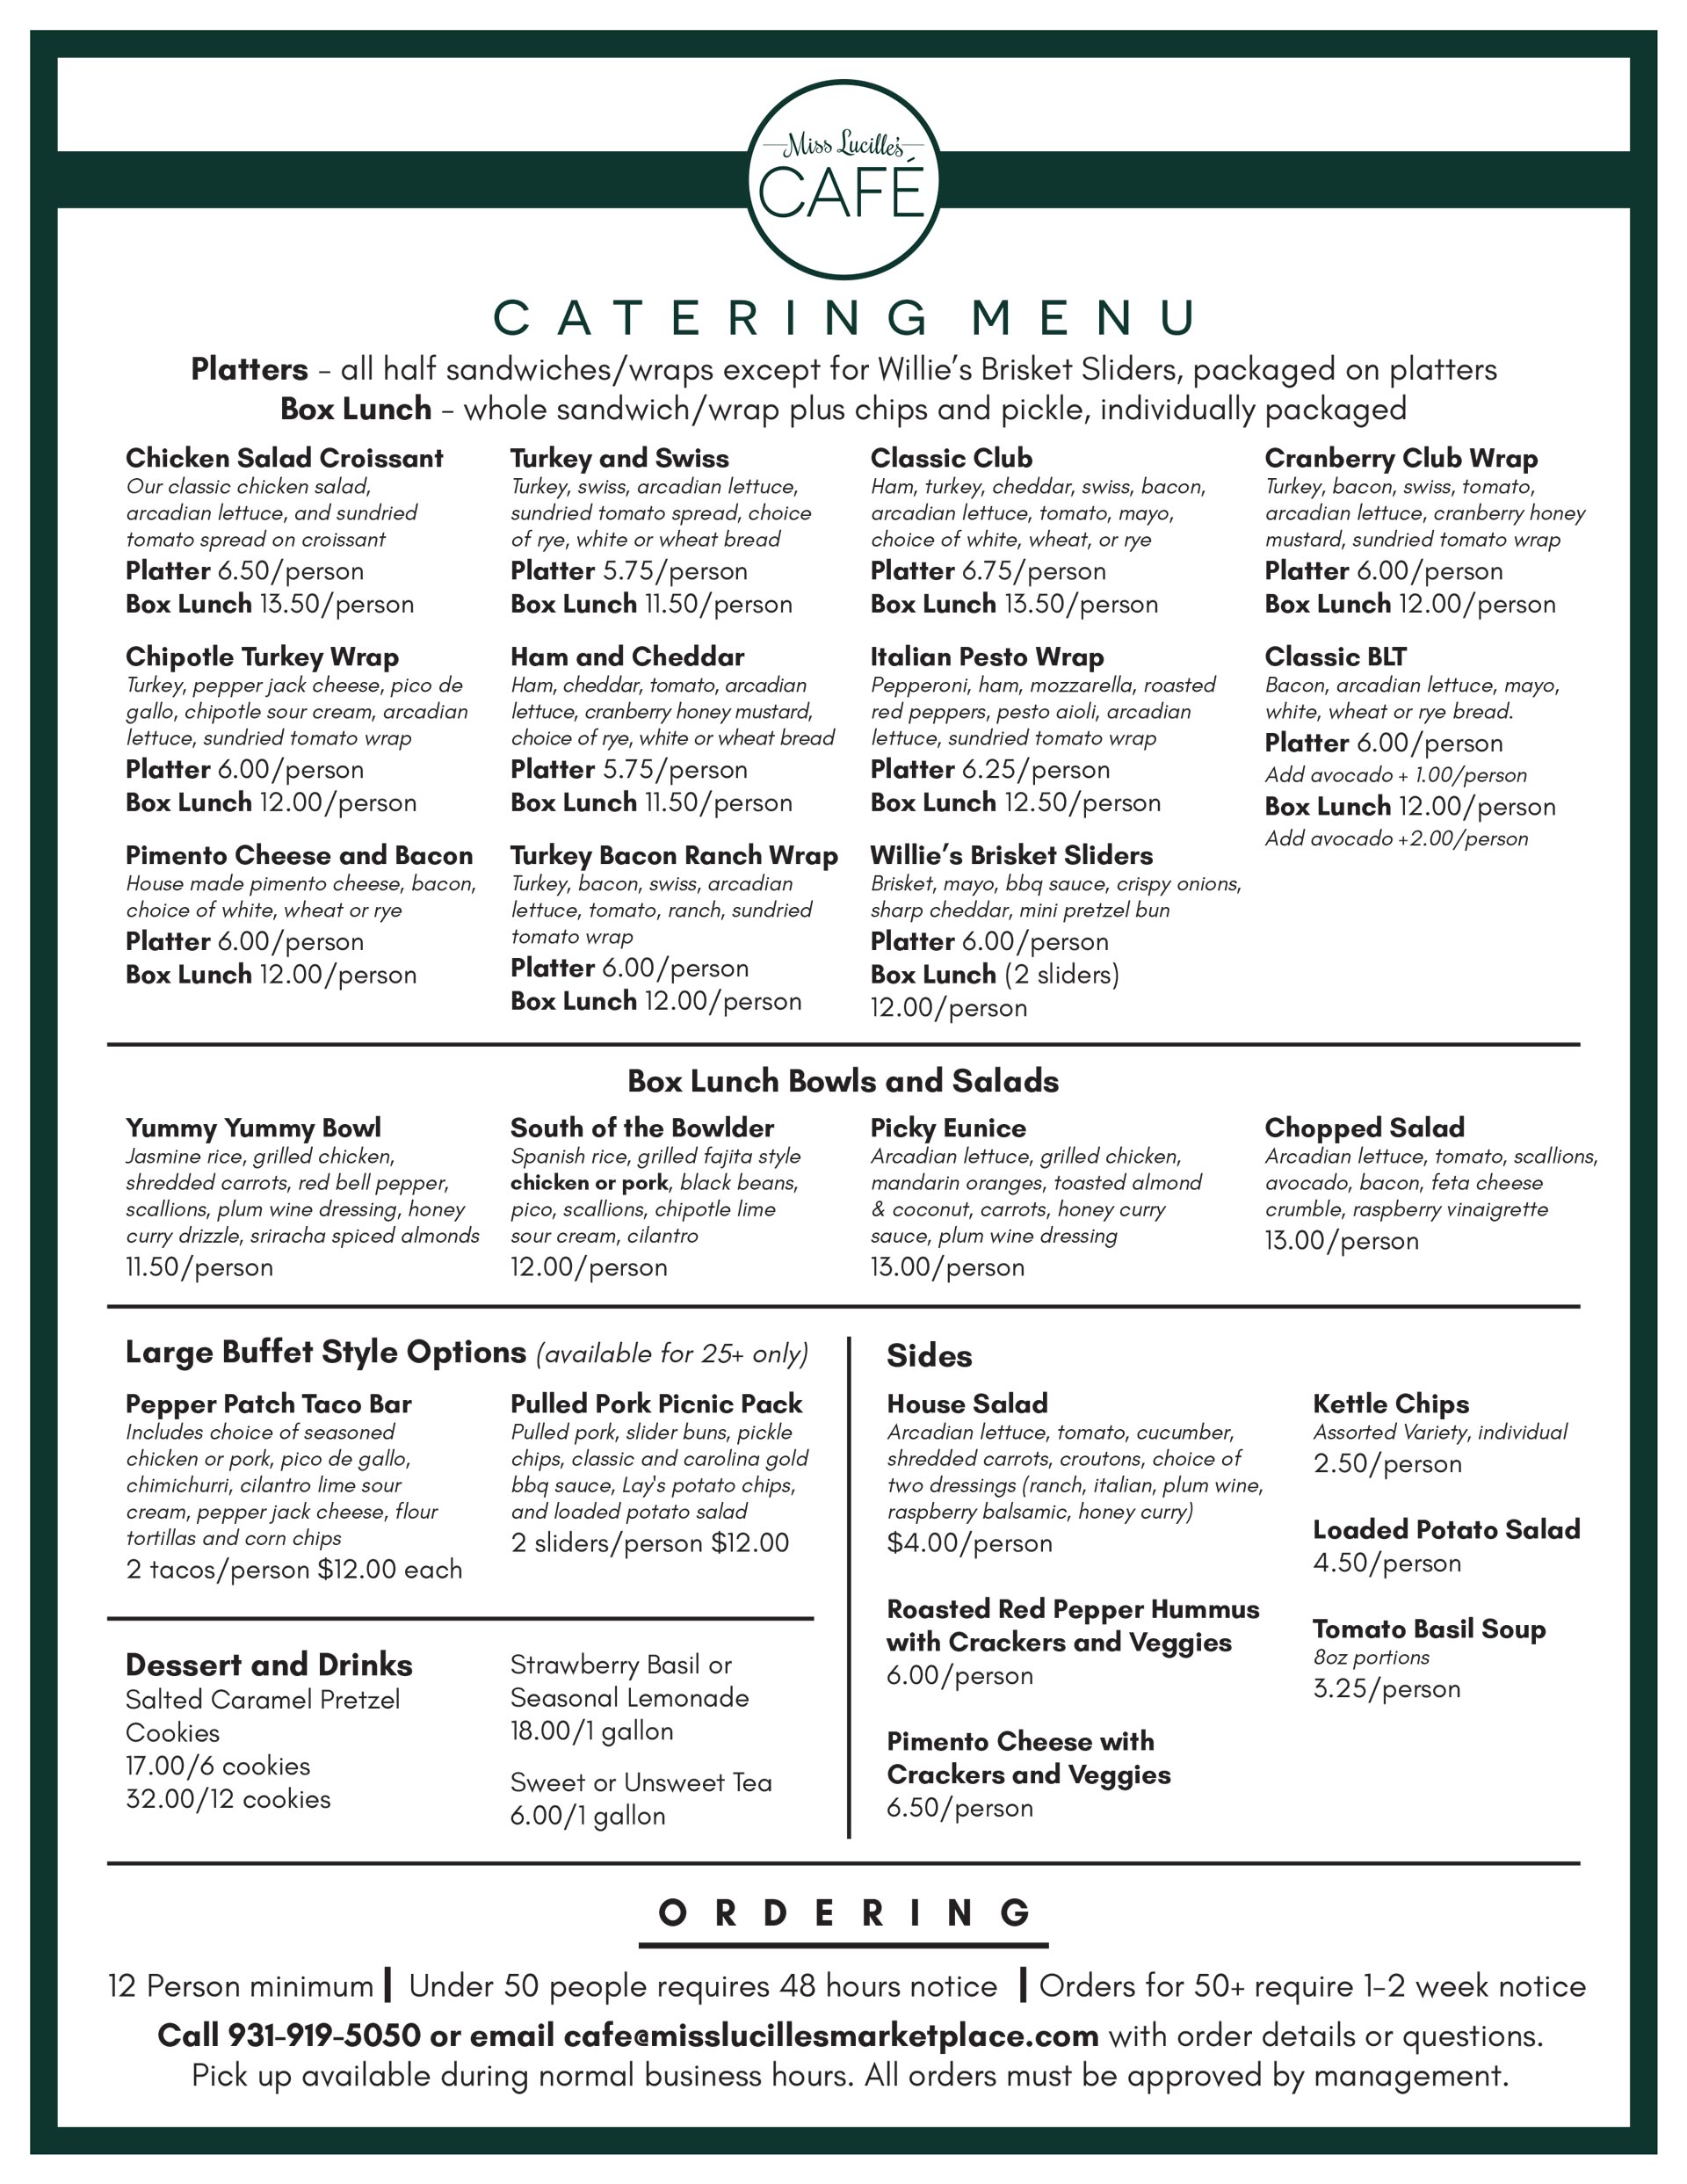 Miss Lucille's Cafe Catering Menu